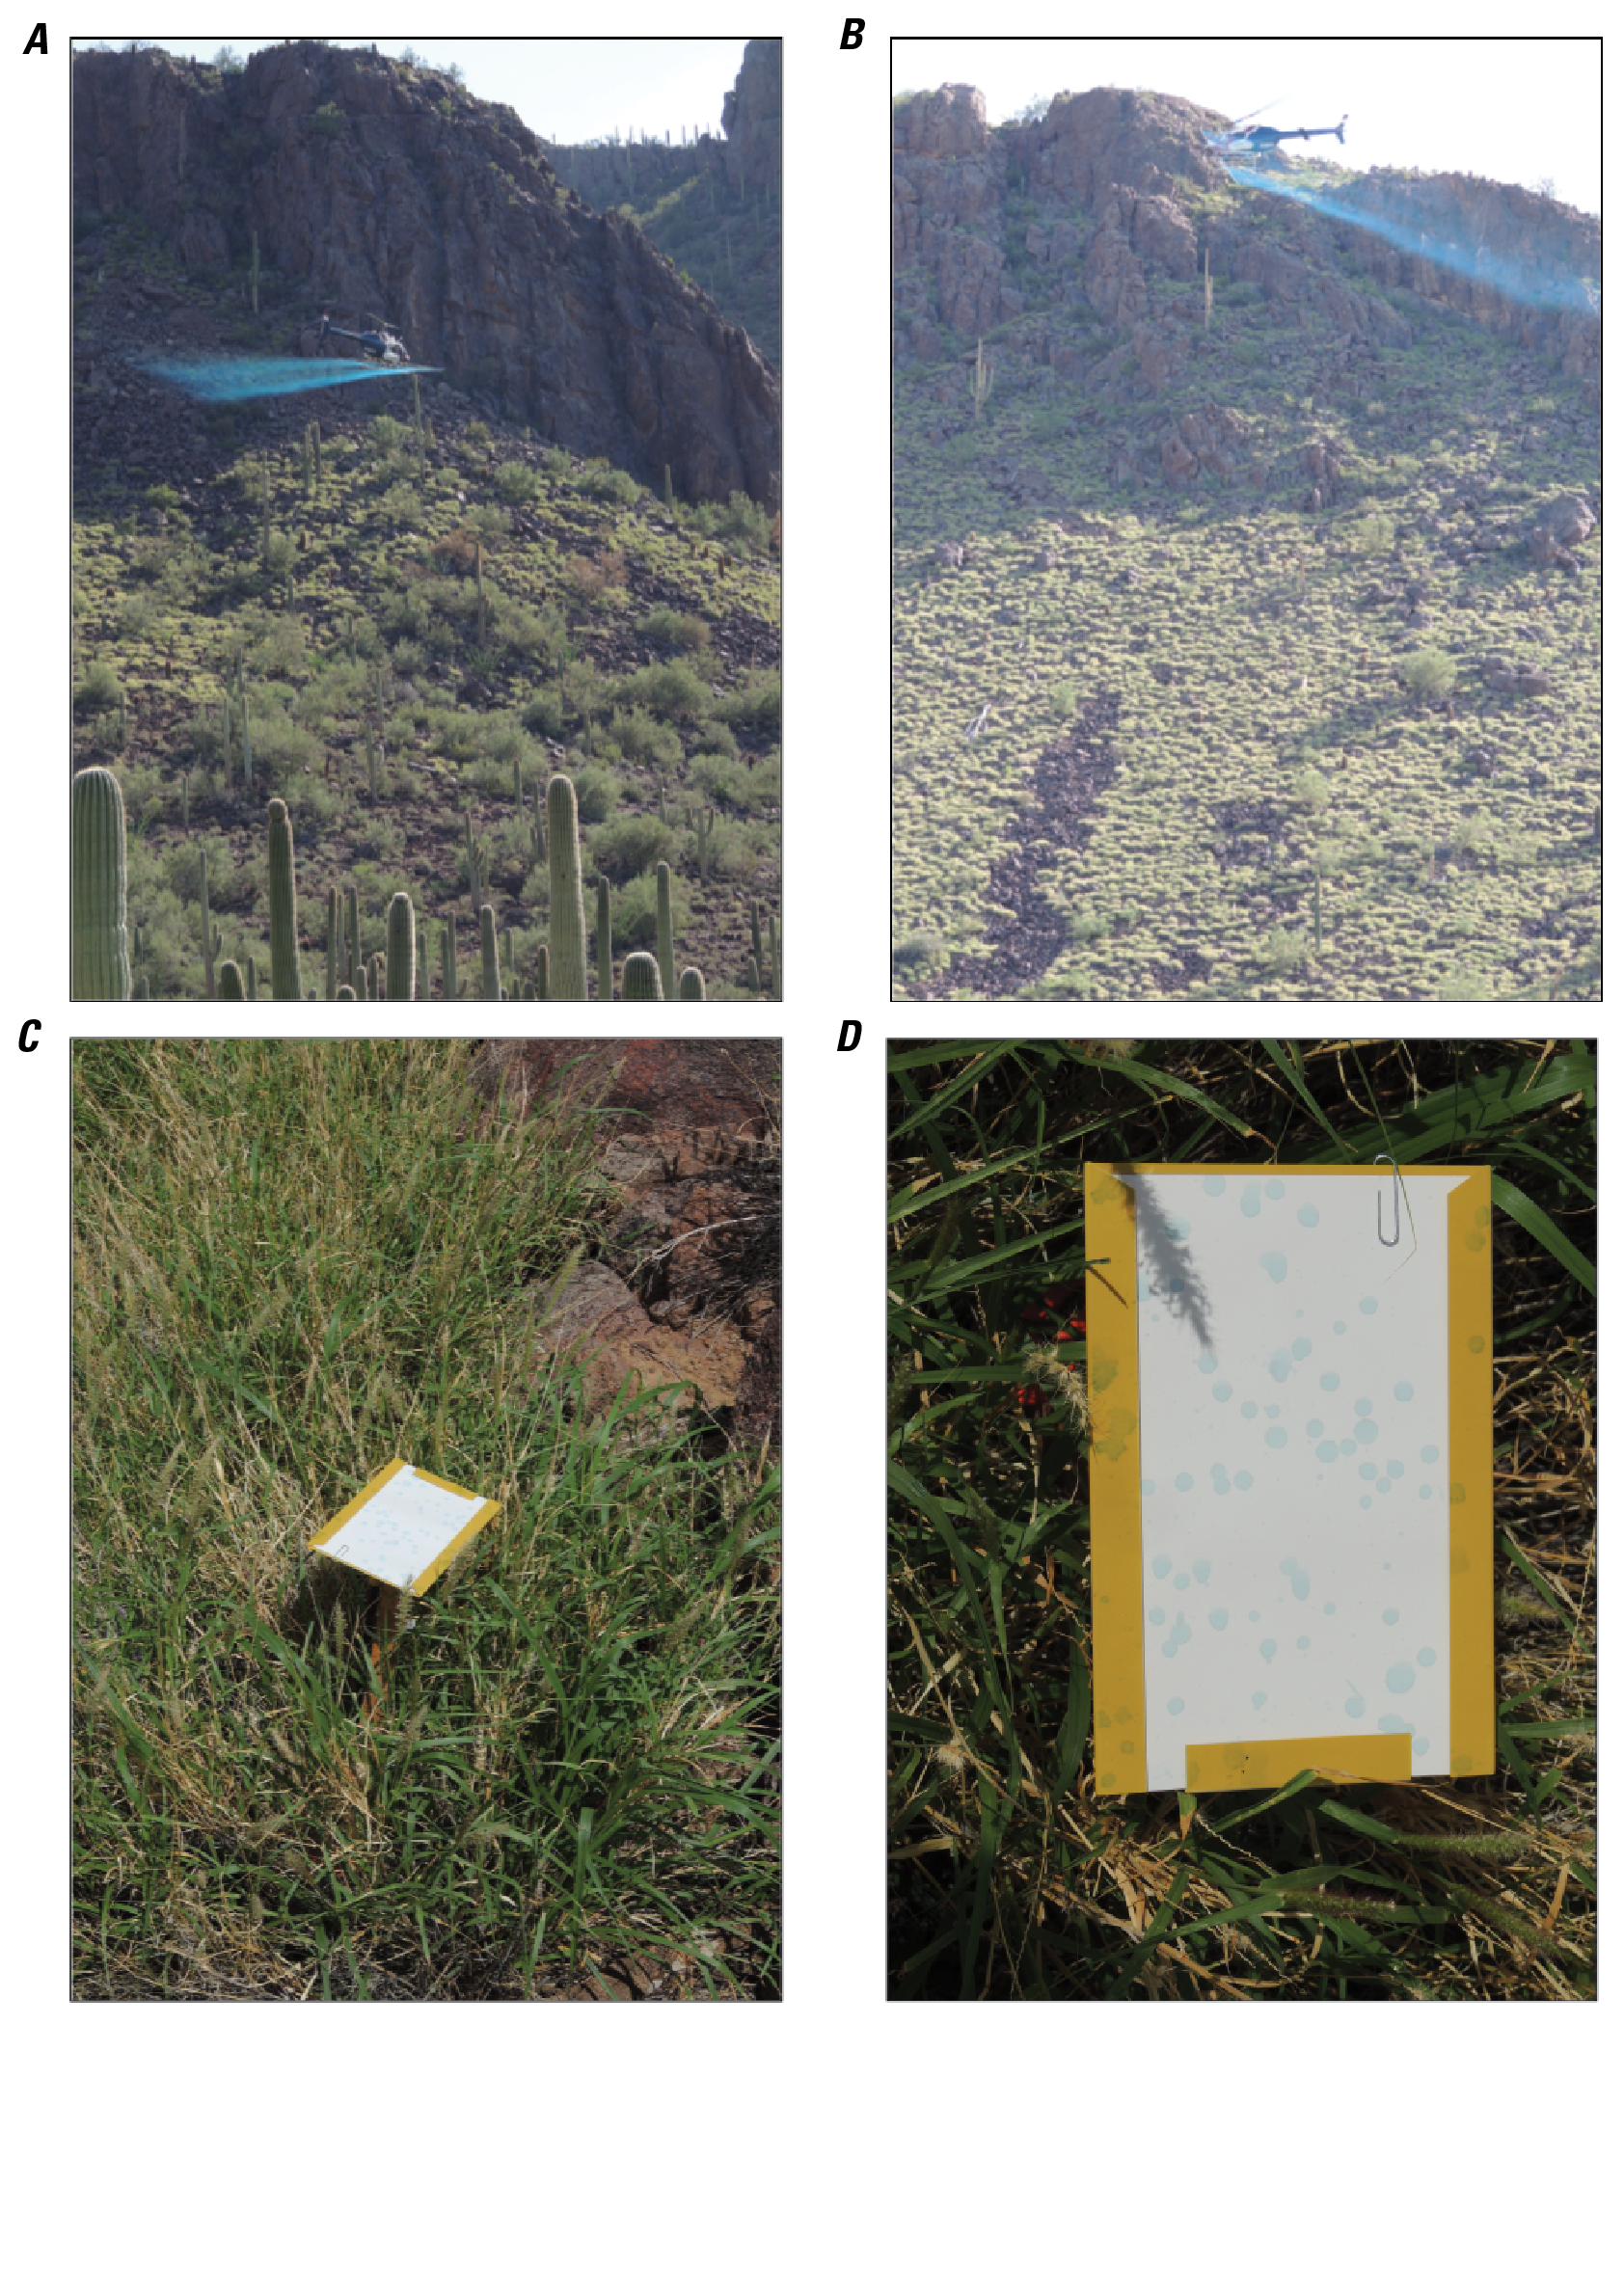 Two photos with helicopter spreading herbicide with blue dye and two photos with card
                     on ground for spray distribution